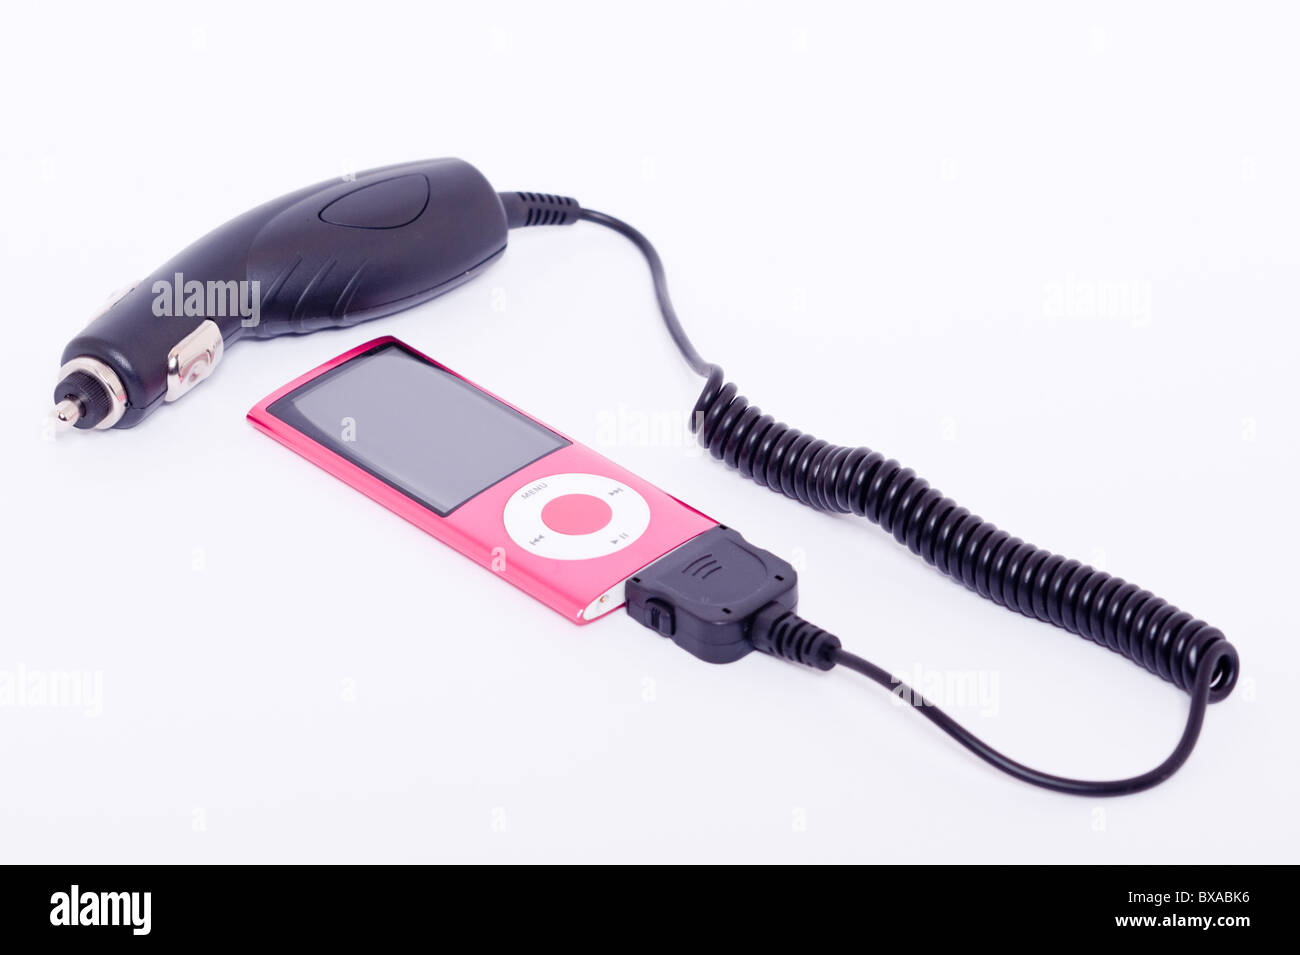 An Ipod Nano 5th generation digital music player with car charger attatched on a white background Stock Photo